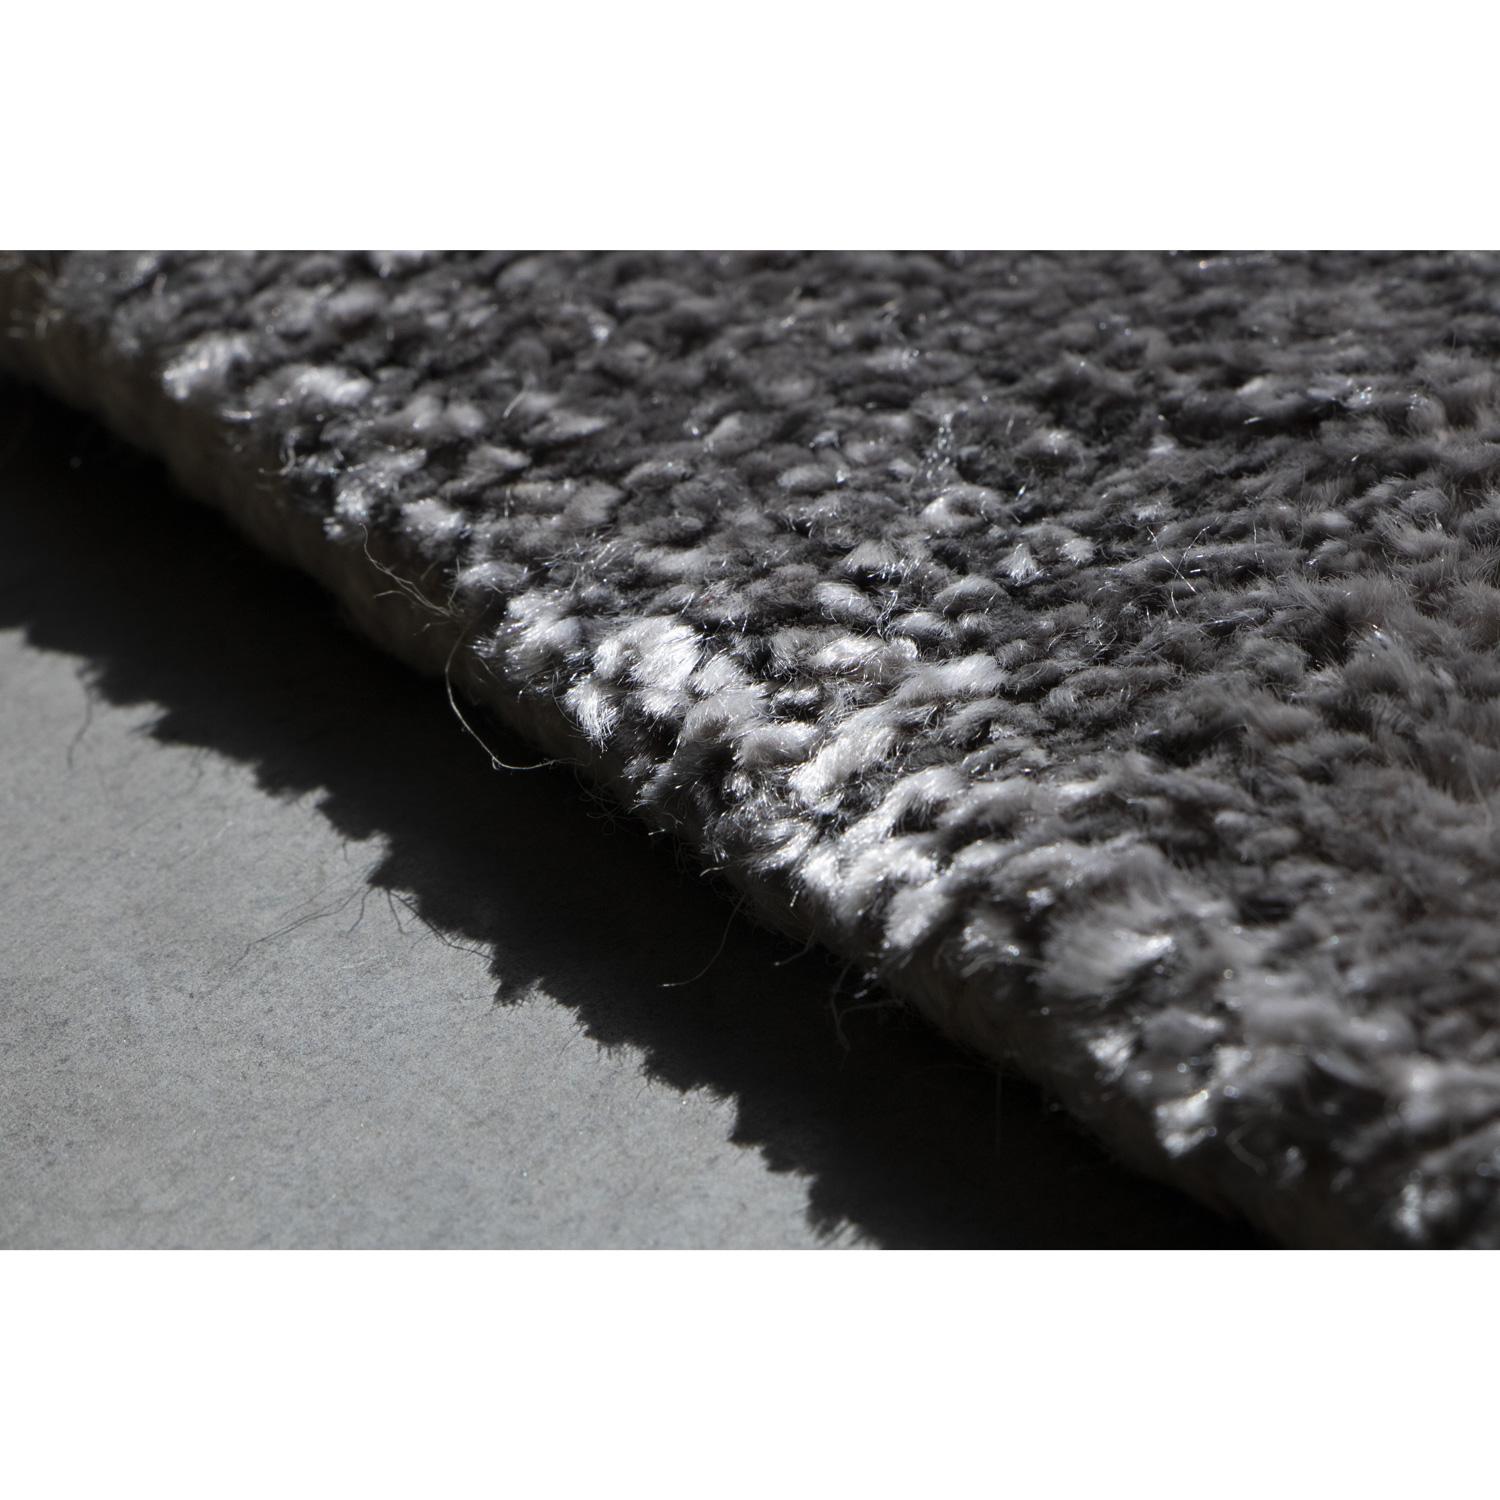 Indian 21st Cent Luxury Shiny Velvety Silvery Rug by Deanna Comellini In Stock 60x120cm For Sale